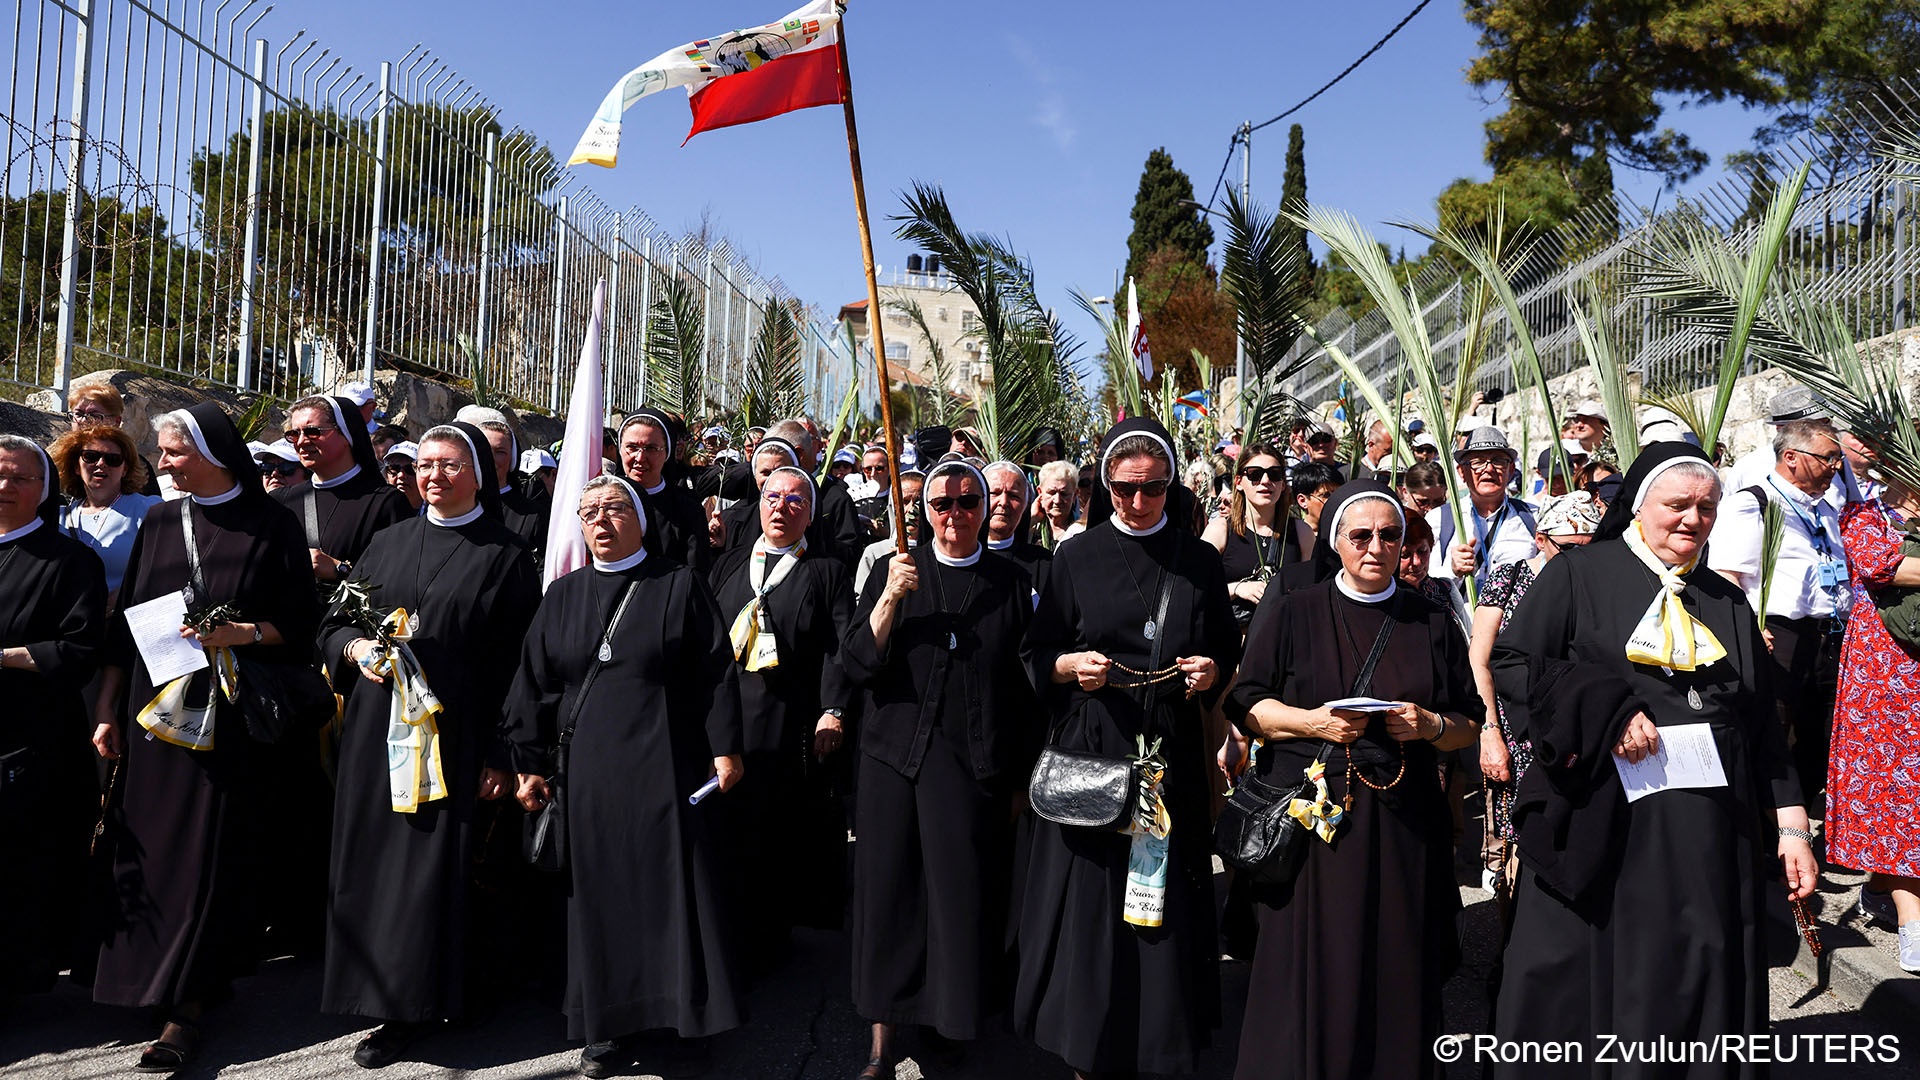 Nuns and other Christian worshippers attend a Palm Sunday procession on the Mount of Olives in Jerusalem, 2 April 2023 (image: REUTERS/Ronen Zvulun)